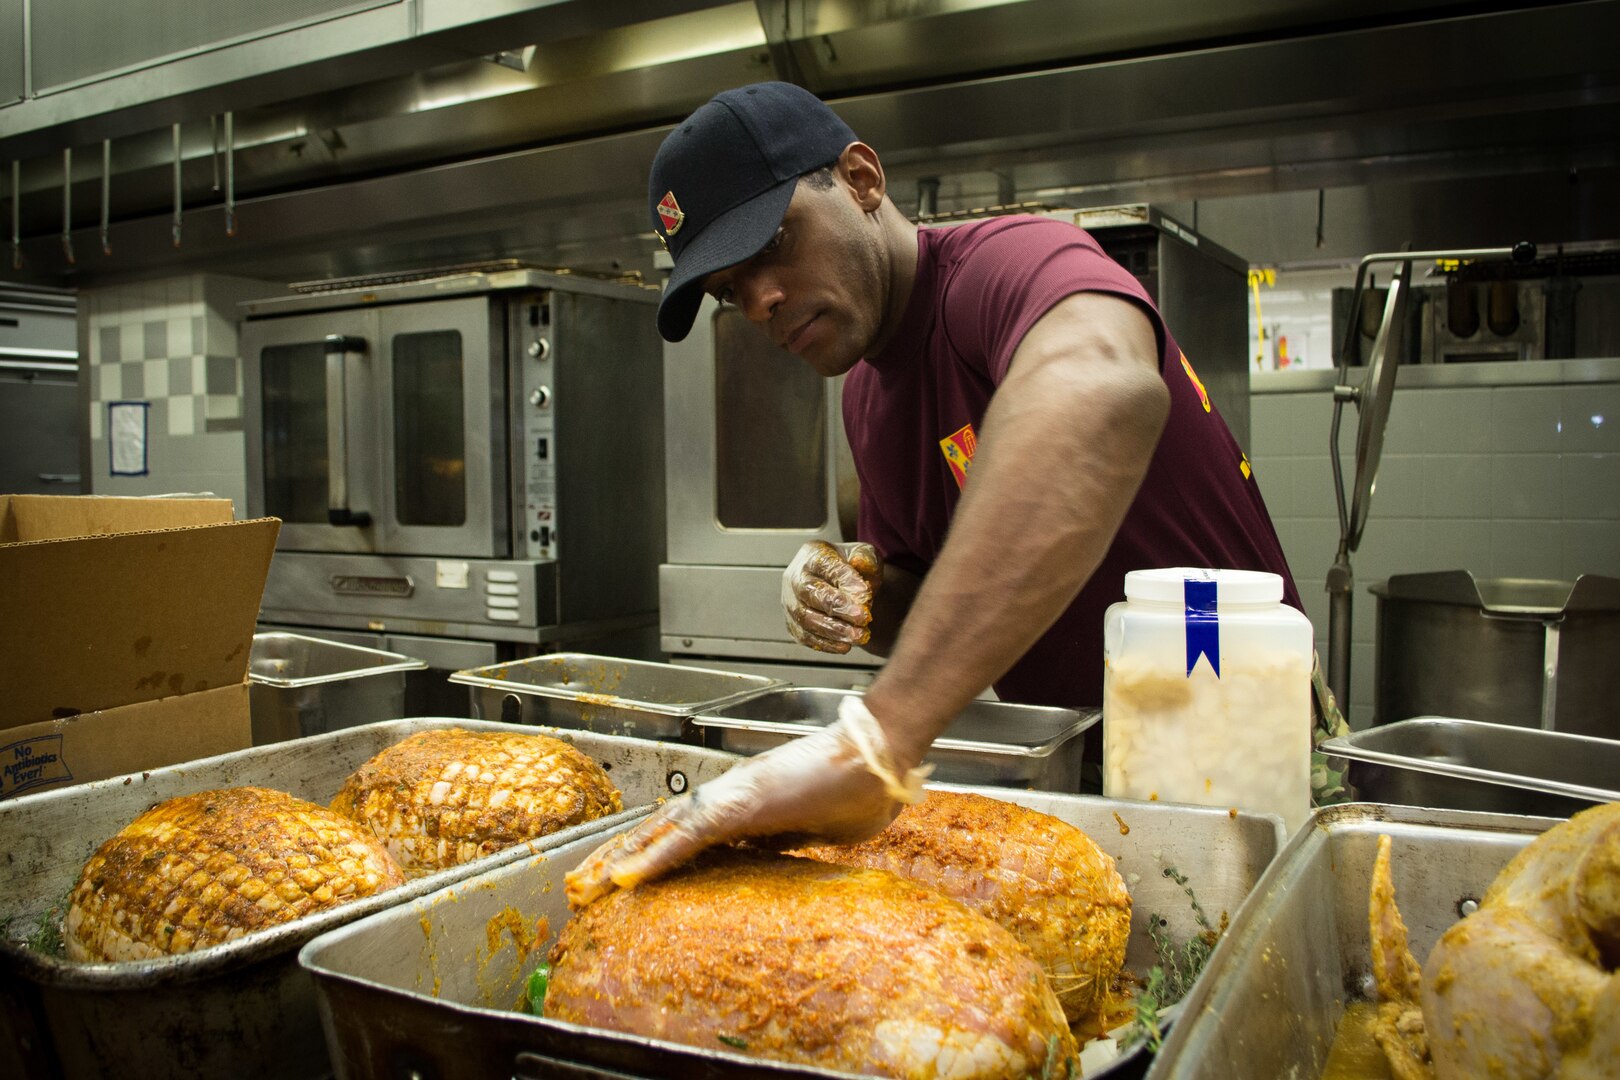 A Culinary Specialist assigned to the 82nd Brigade Support Battalion, 3rd Brigade Combat Team, 82nd Airborne Division prepares hams Monday, November 19, 2018 at the brigade’s dining facility.  

Culinary Specialists from the battalion spent entire night preparing over 640 lbs. of turkey, 558 lbs. of steamship round, 72 lbs. of shrimp, more than 100 pies, approximately 700 servings of sweet potatoes and approximately 800 servings of green bean casserole to serve during the brigade’s Thanksgiving feast the next day.